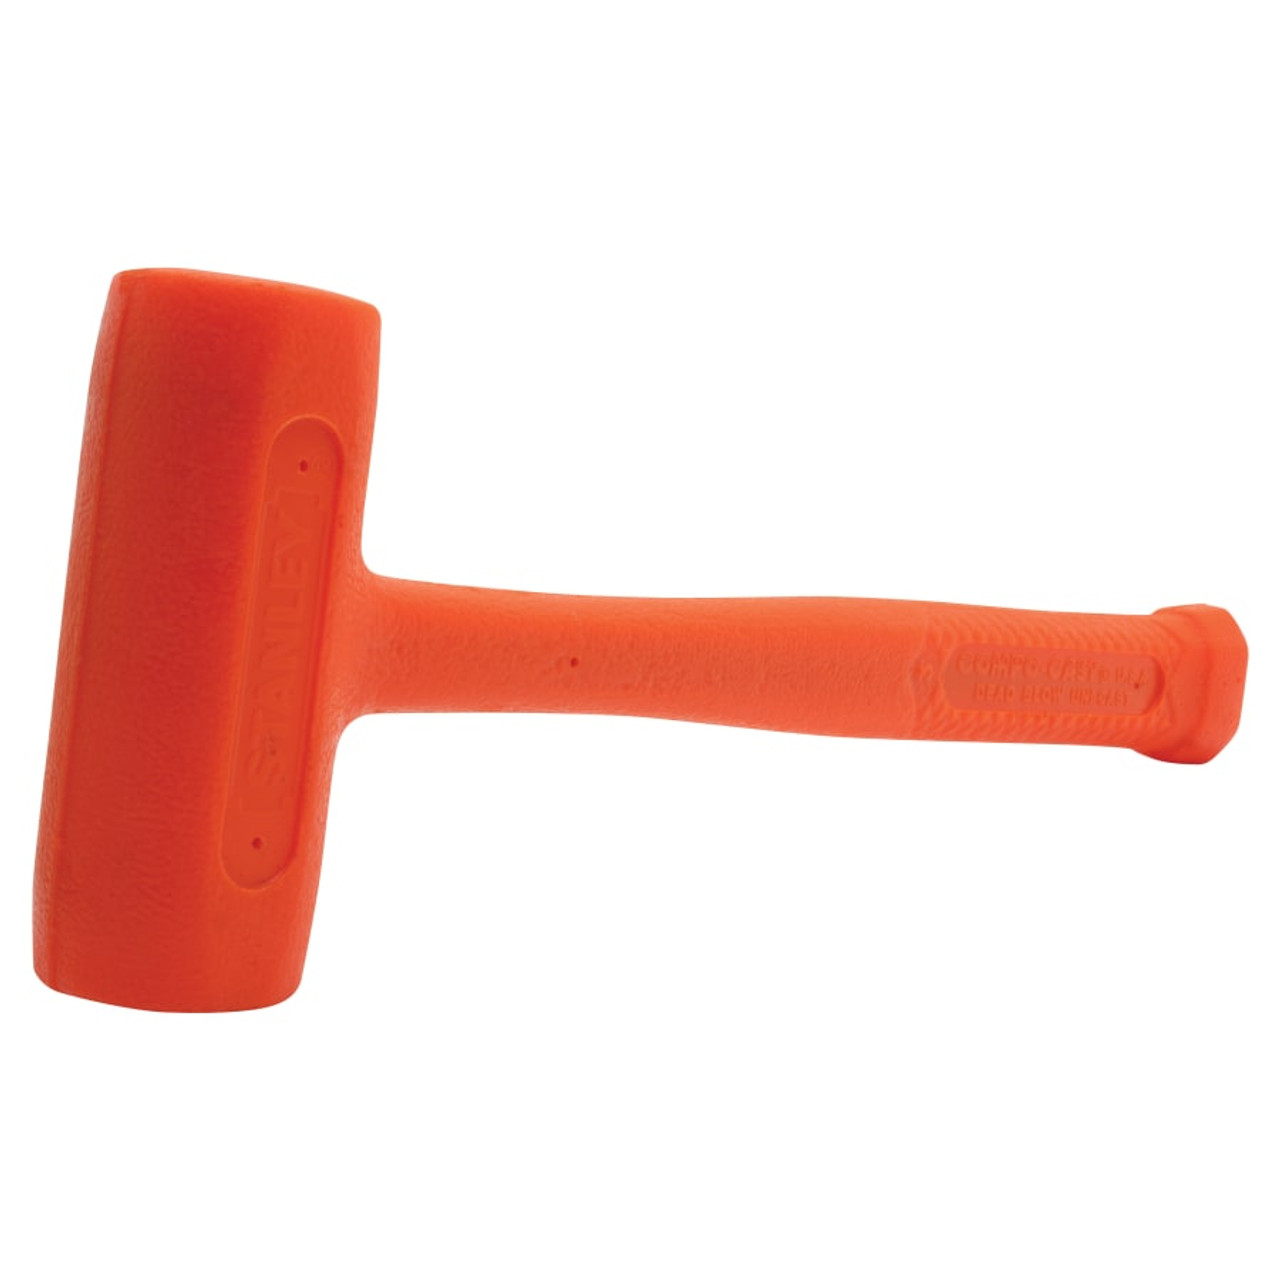 Compo-Cast Slimline Head Soft Face Hammers, 18 oz Head, 1 1/2 in Dia